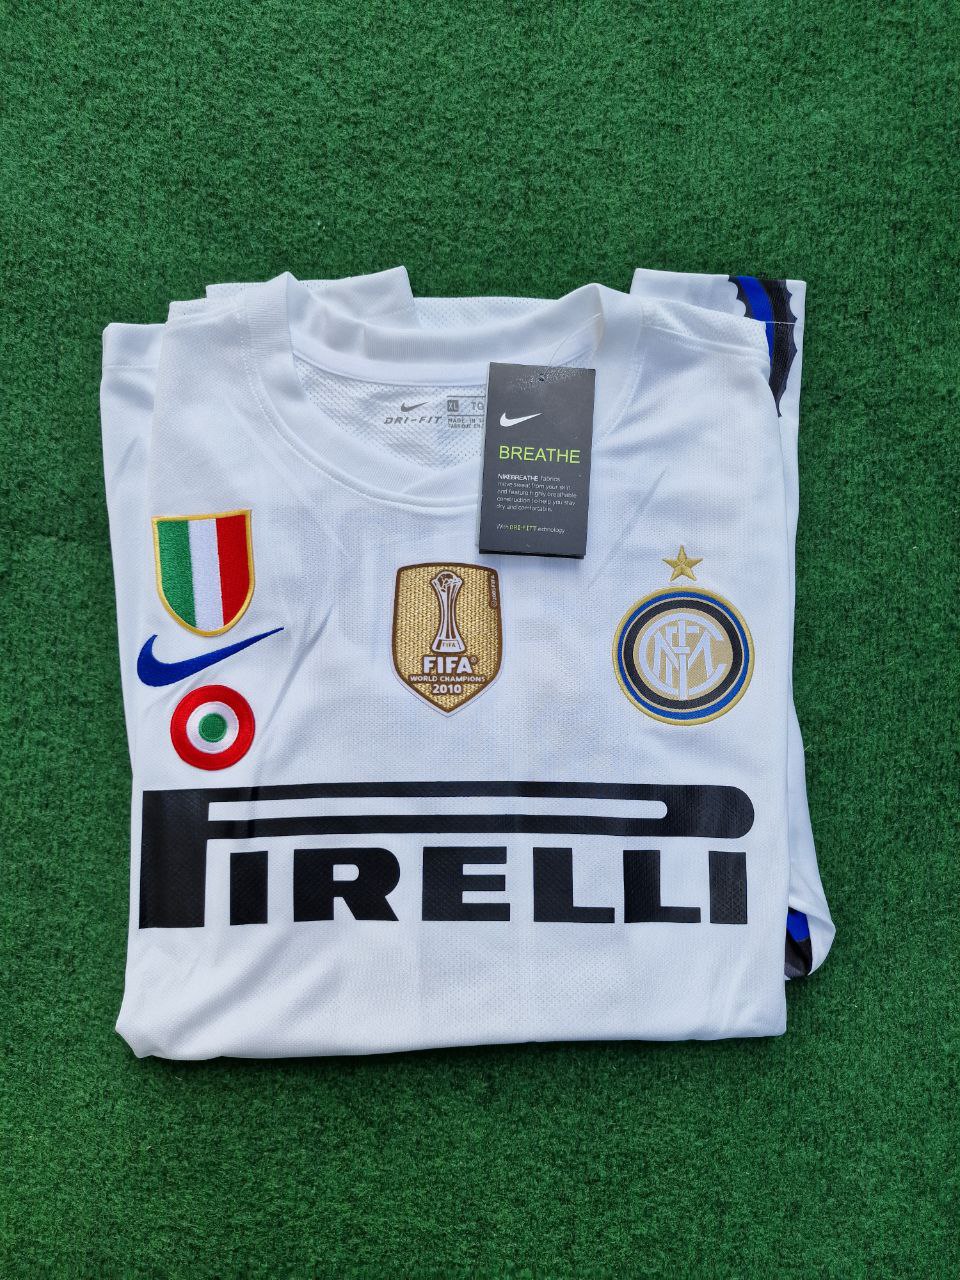 Inter 2010 2011 Wesley Snejder White Retro Jersey Maillot Trikot Maglia